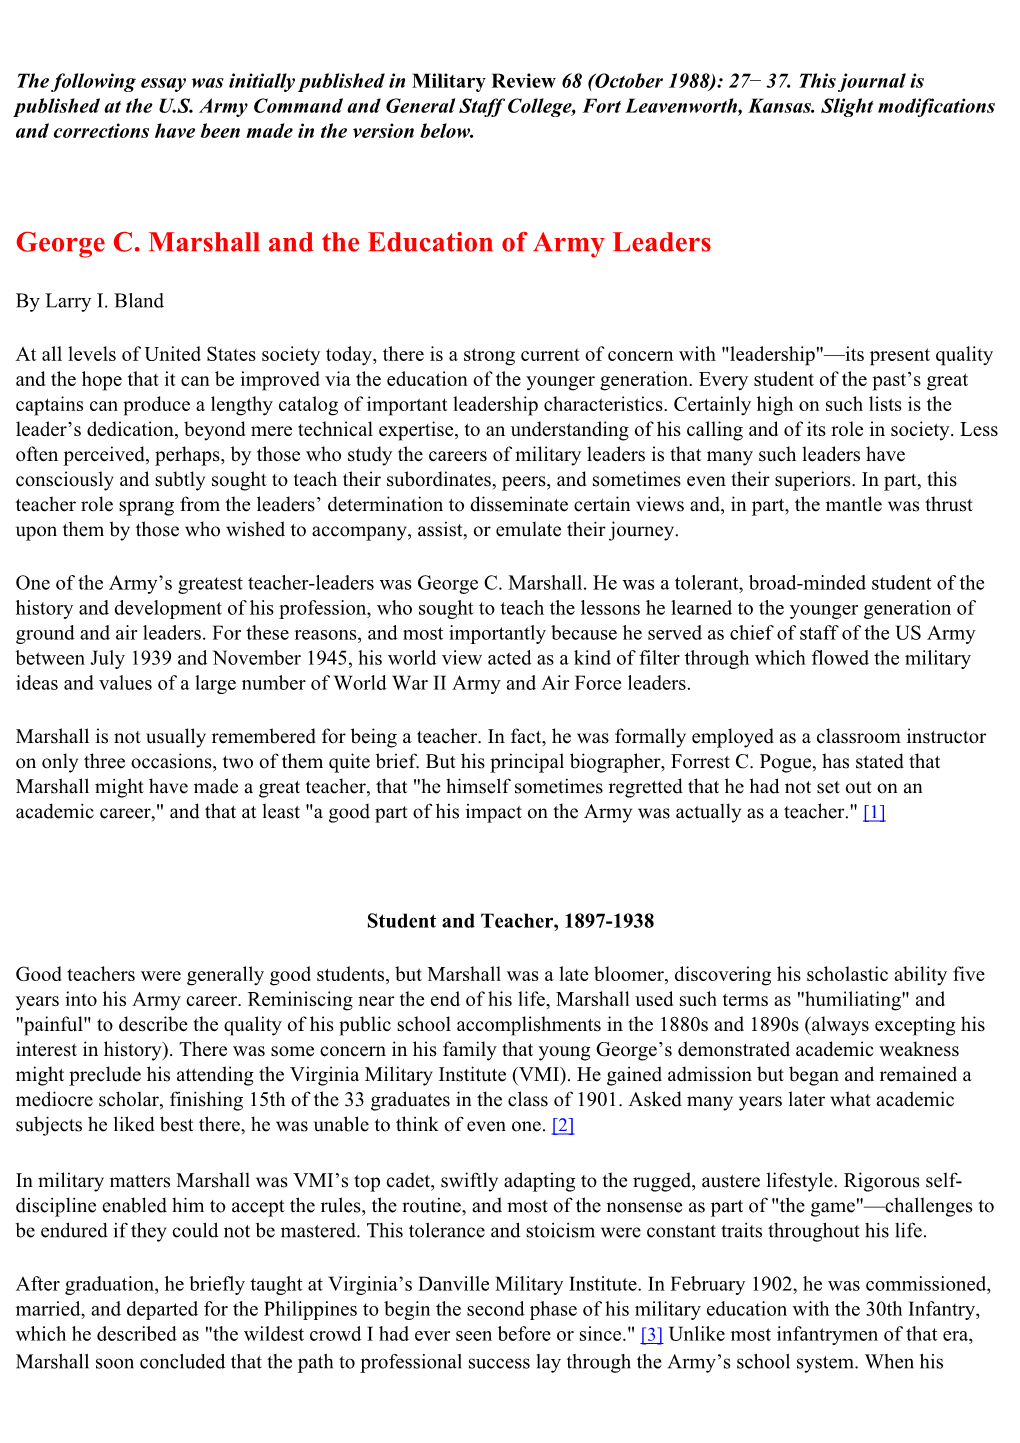 George C. Marshall and the Education of Army Leaders